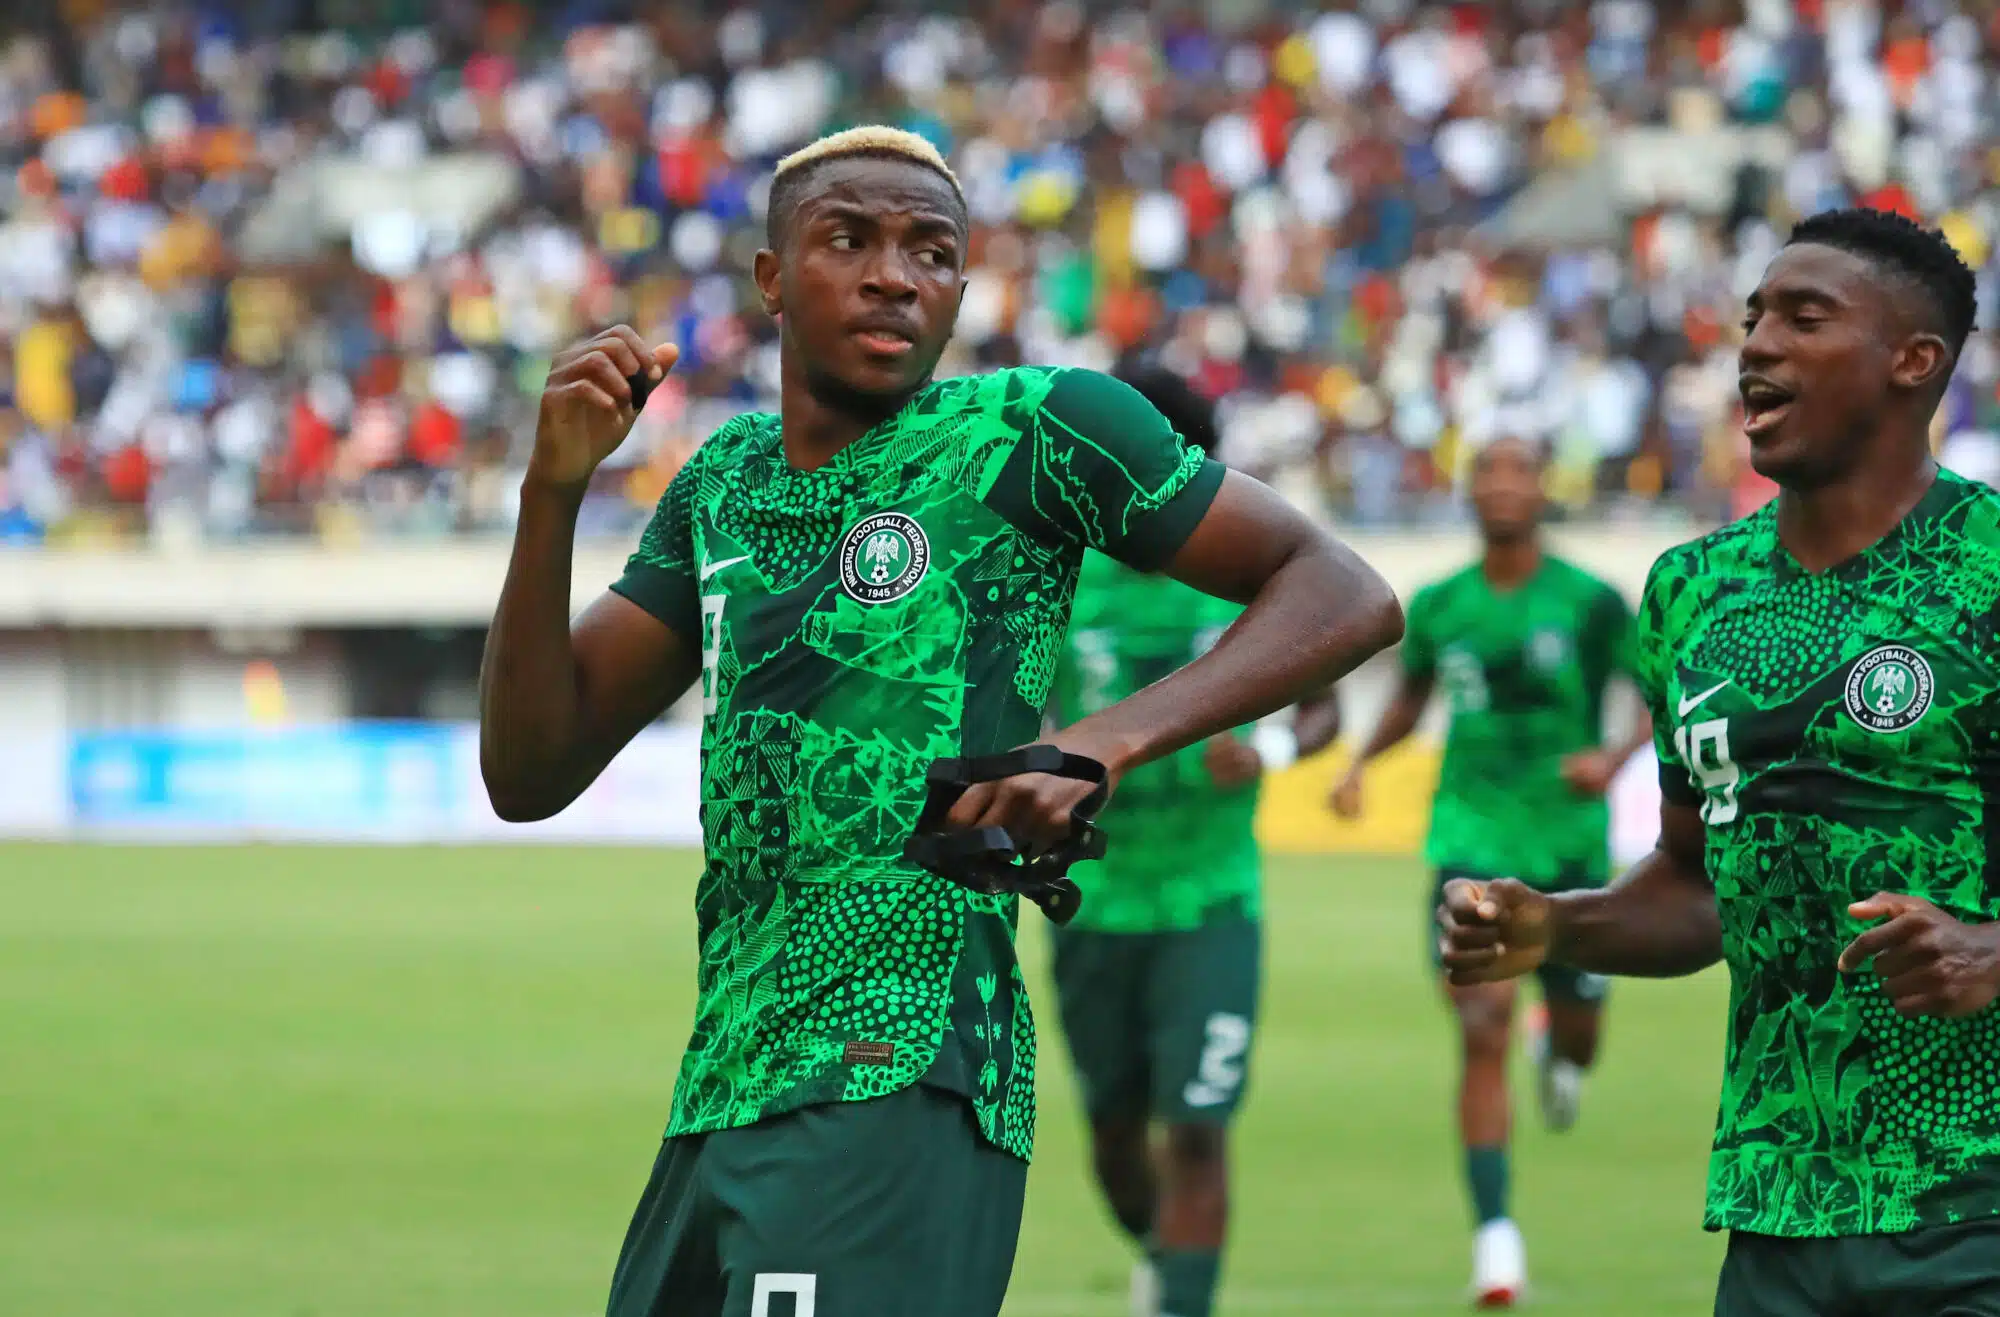 Sports Minister Vows: Nigeria's Super Eagles must soar to 2026 World Cup